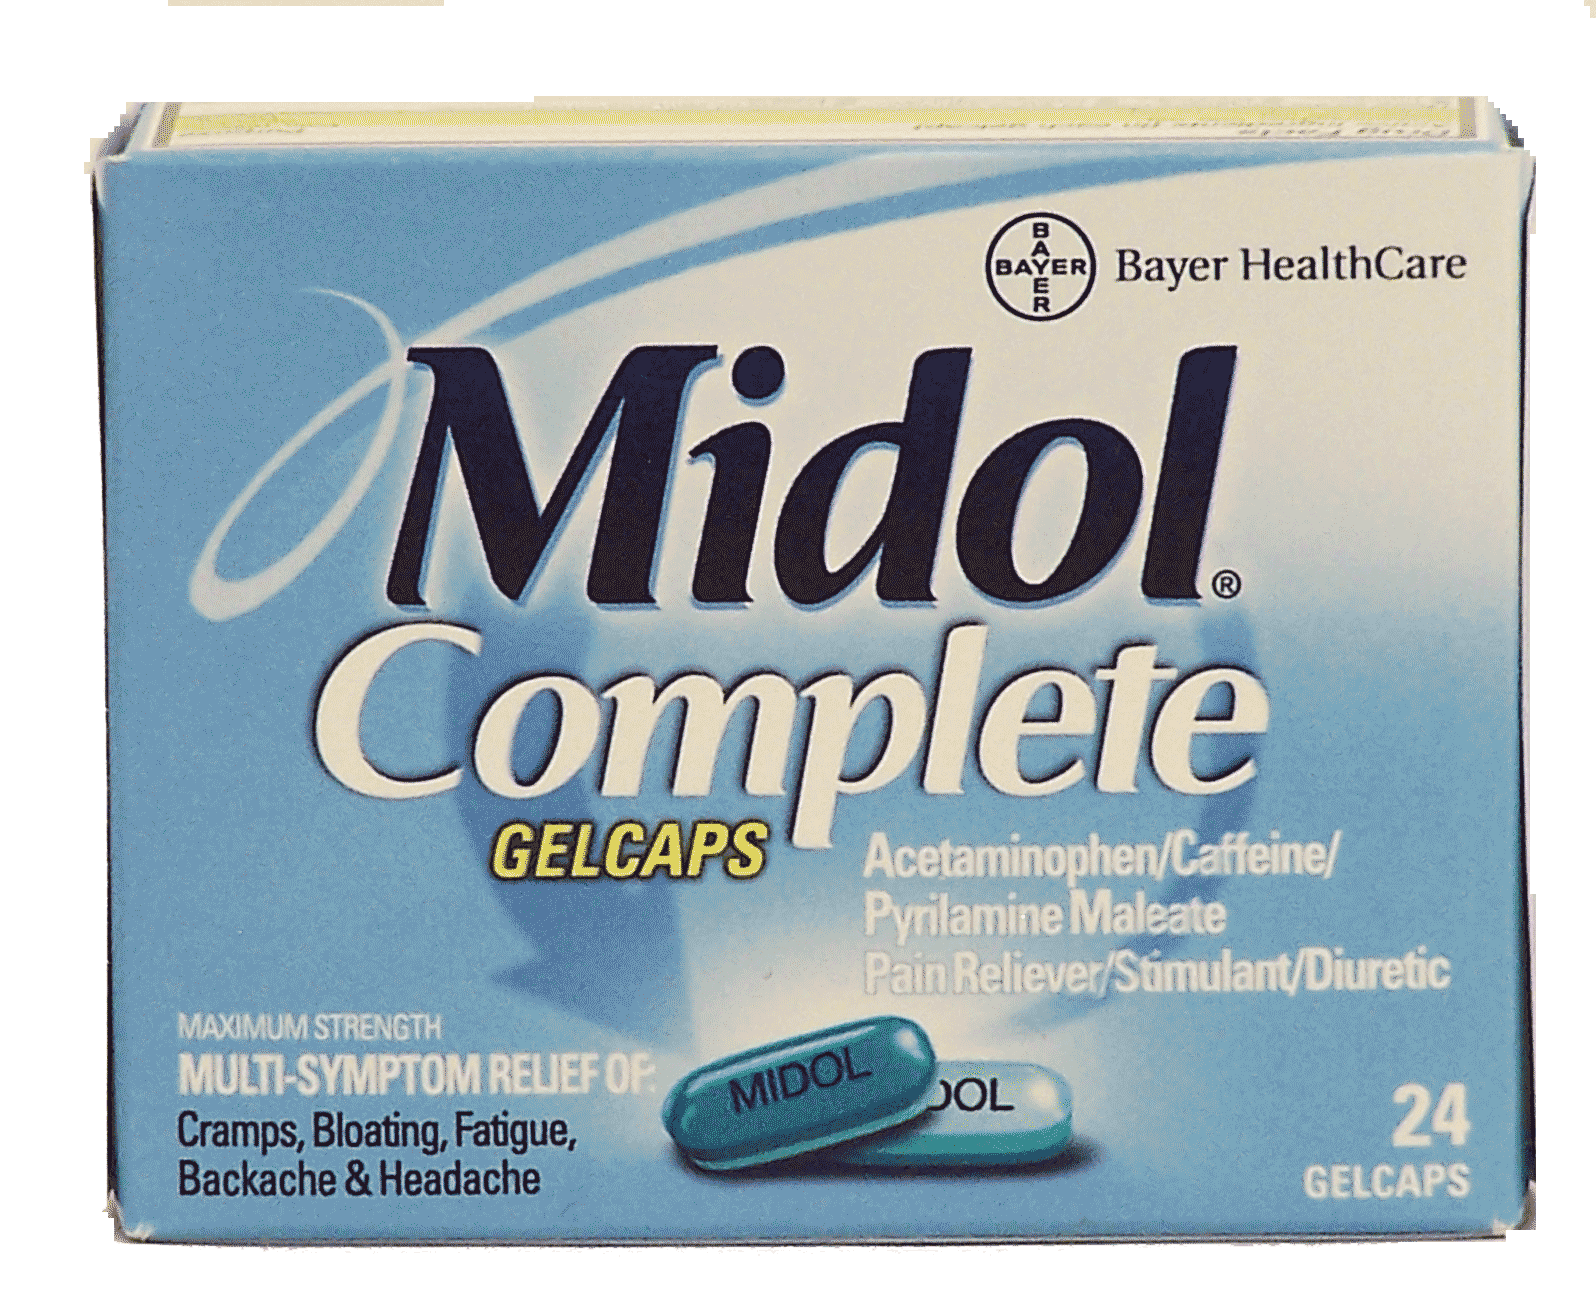 Midol Complete pain reliever, gelcaps Full-Size Picture